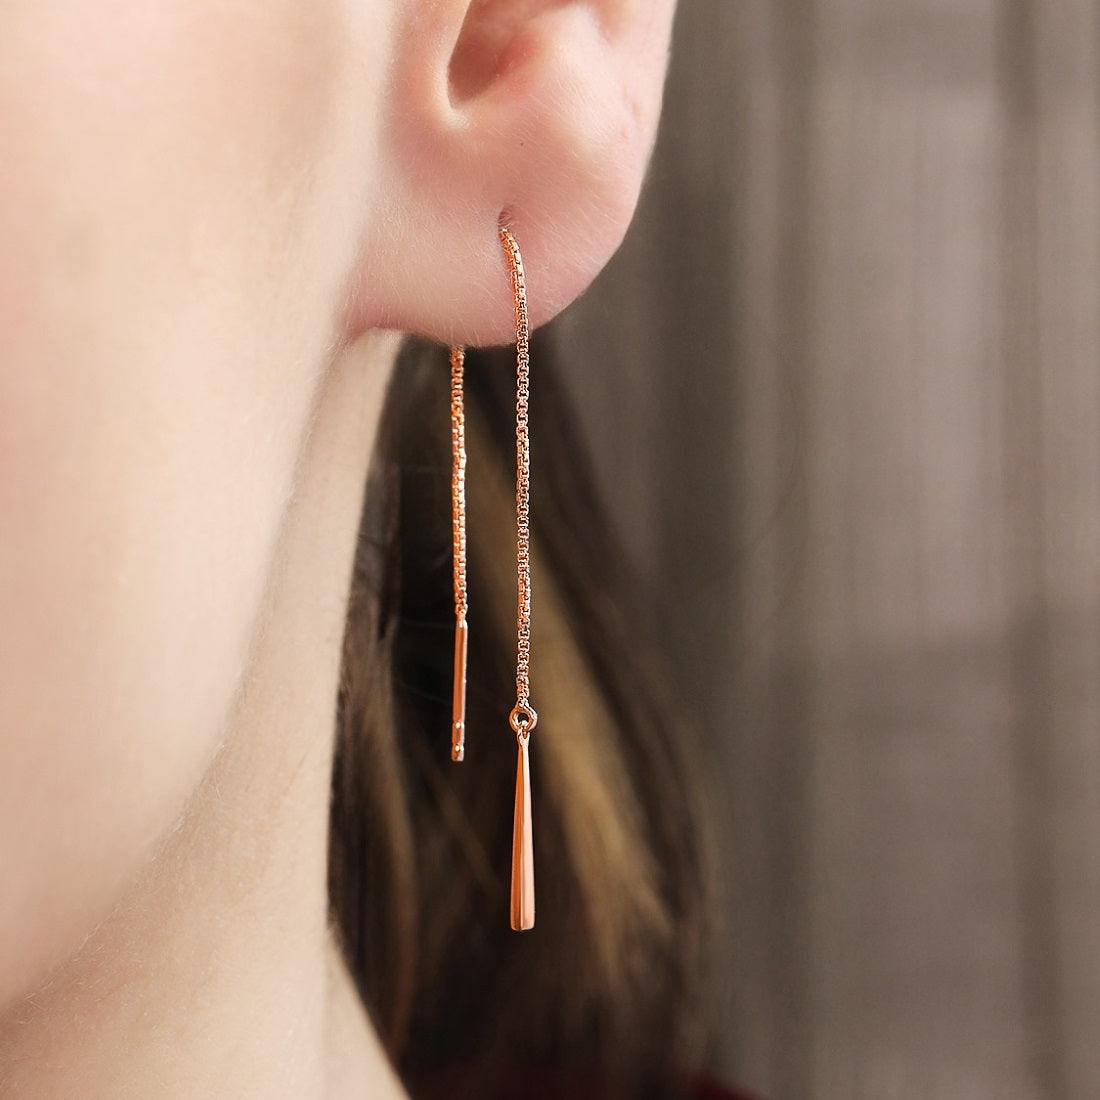 Sui Dhaga 925 Silver Earrings in Rose Gold